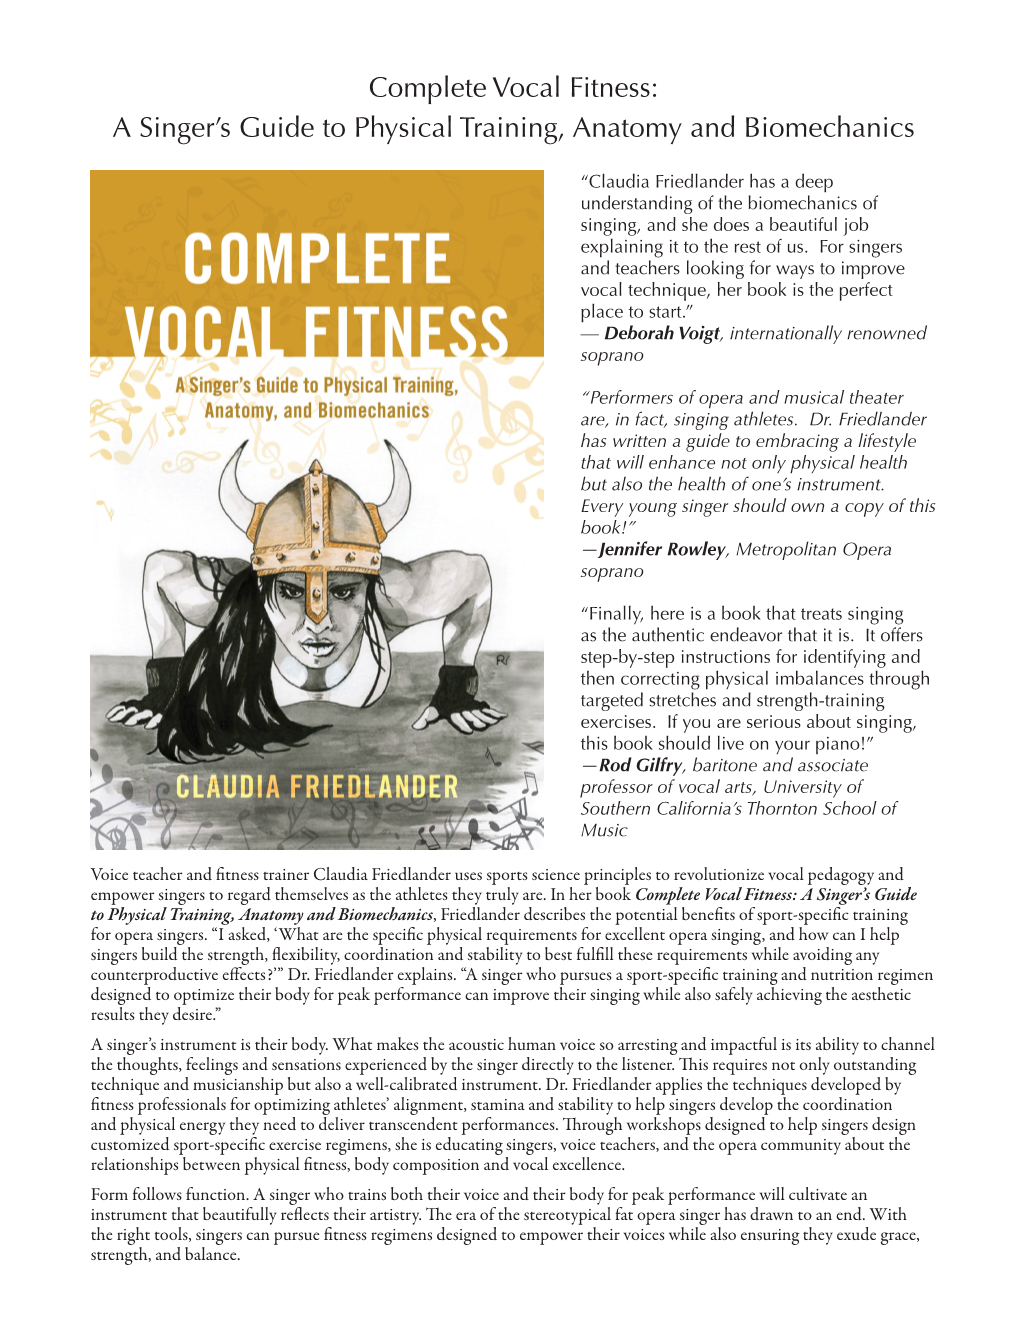 Complete Vocal Fitness: a Singer's Guide to Physical Training